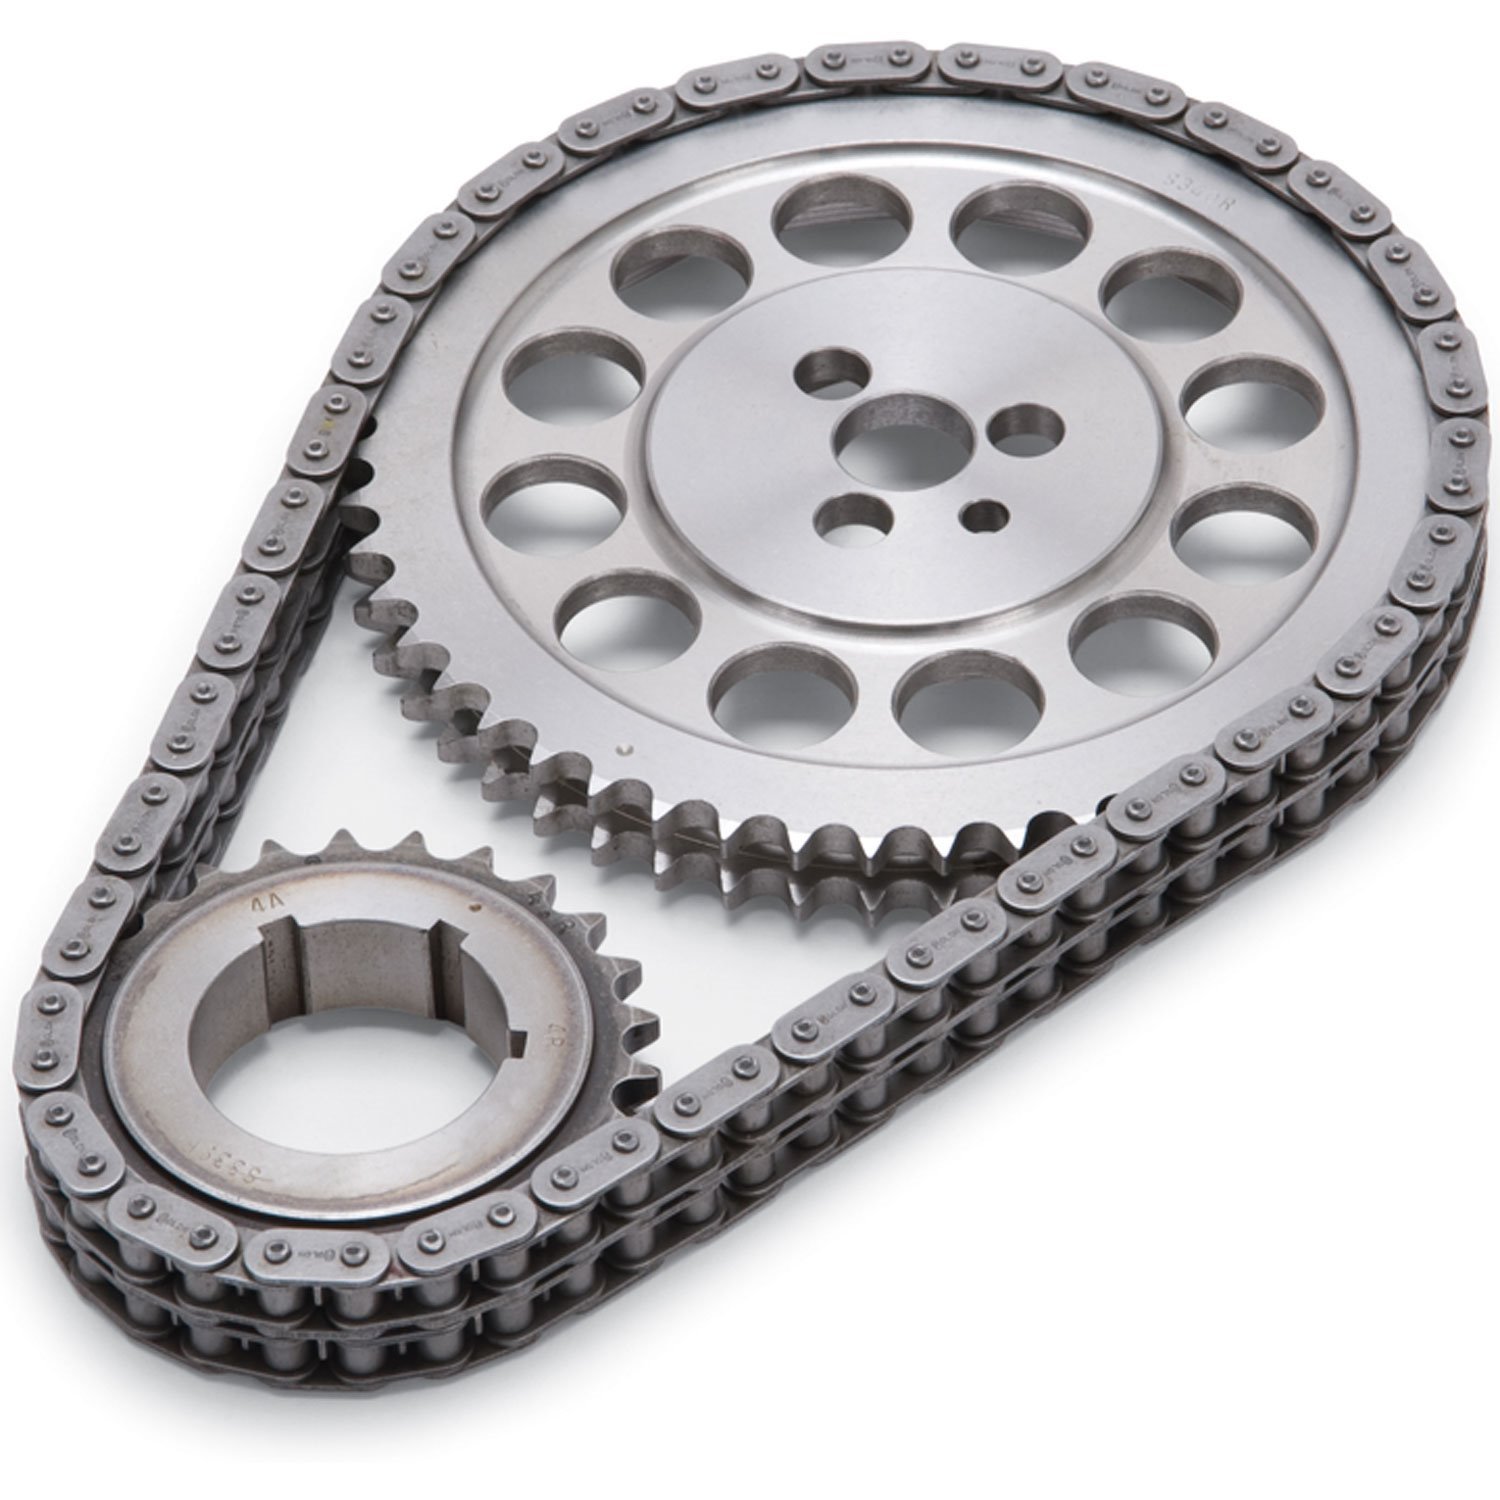 Edelbrock 7808 Performer-Link Timing Chain and Gear Set 